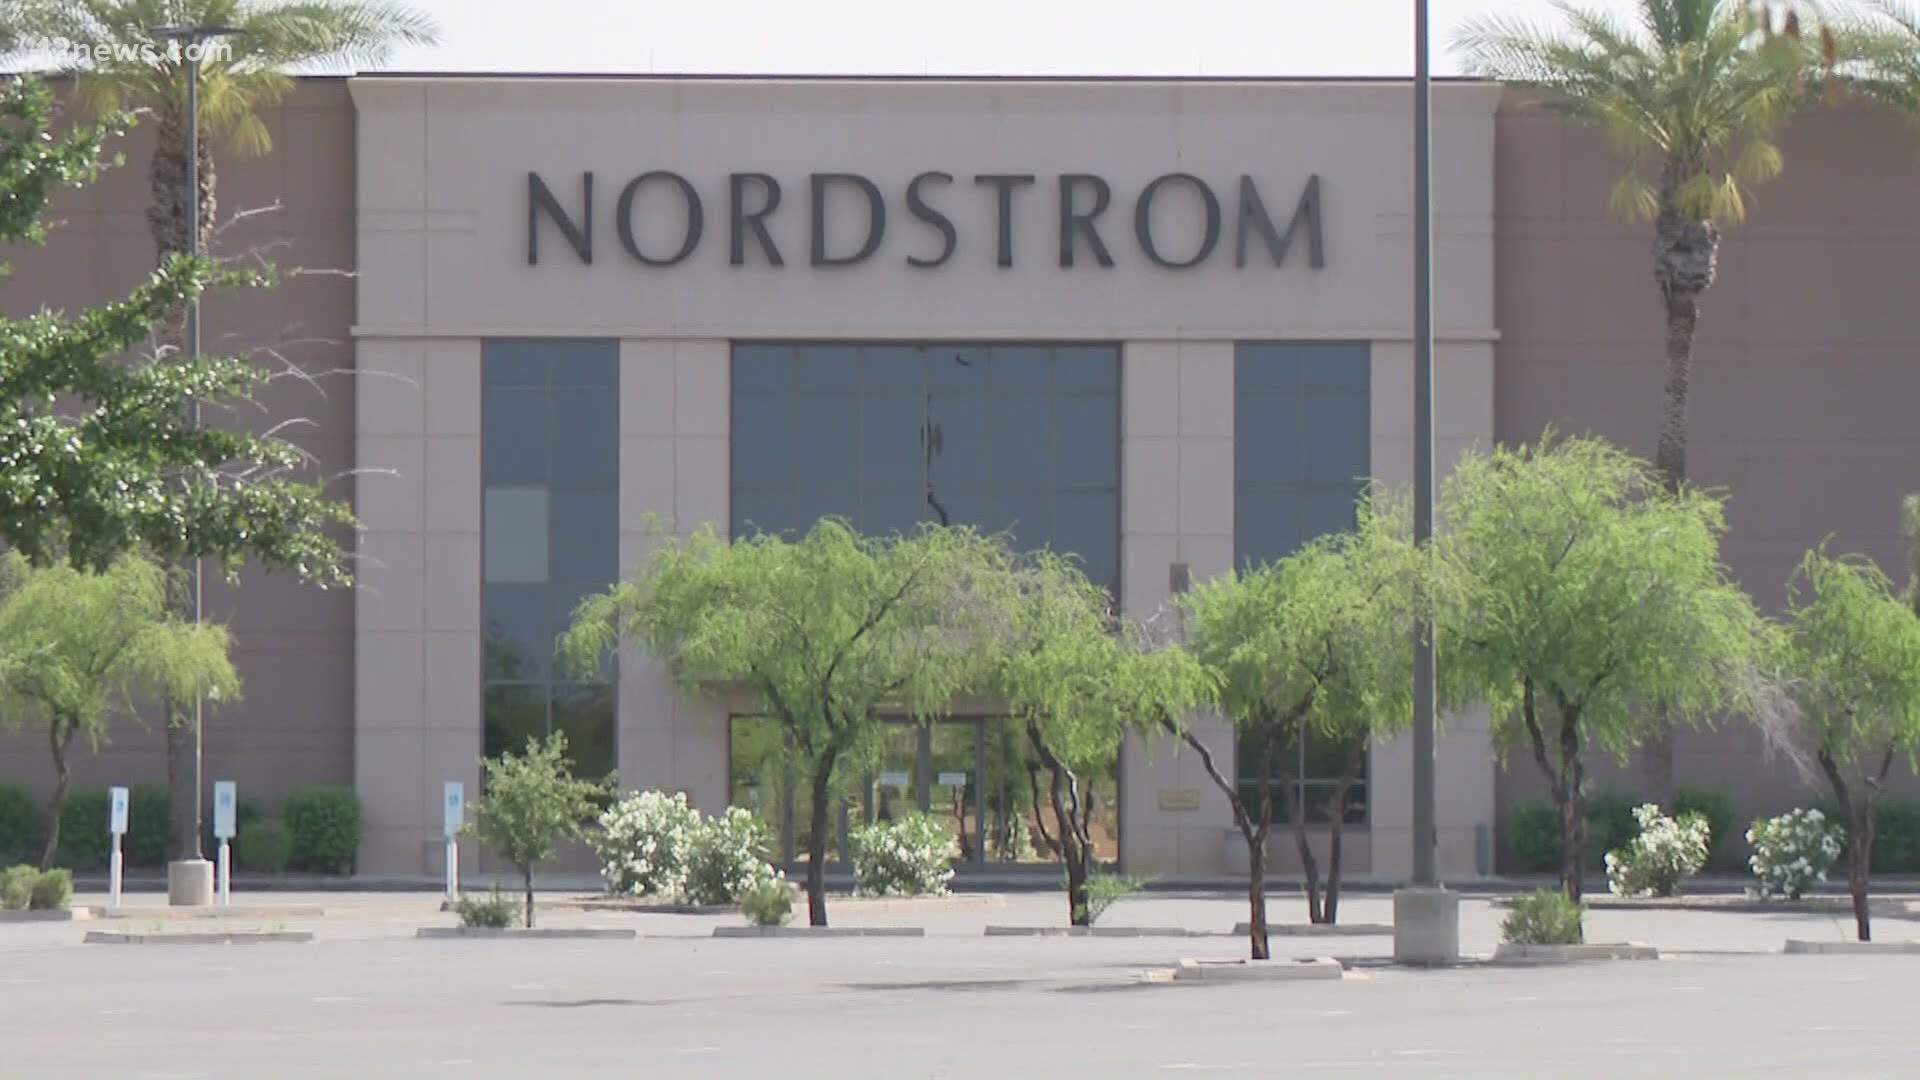 As some stores begin to reopen, others are announcing major closures. Nordstrom is closing its Chandler location. The company sites COVID-19 as the reason why.